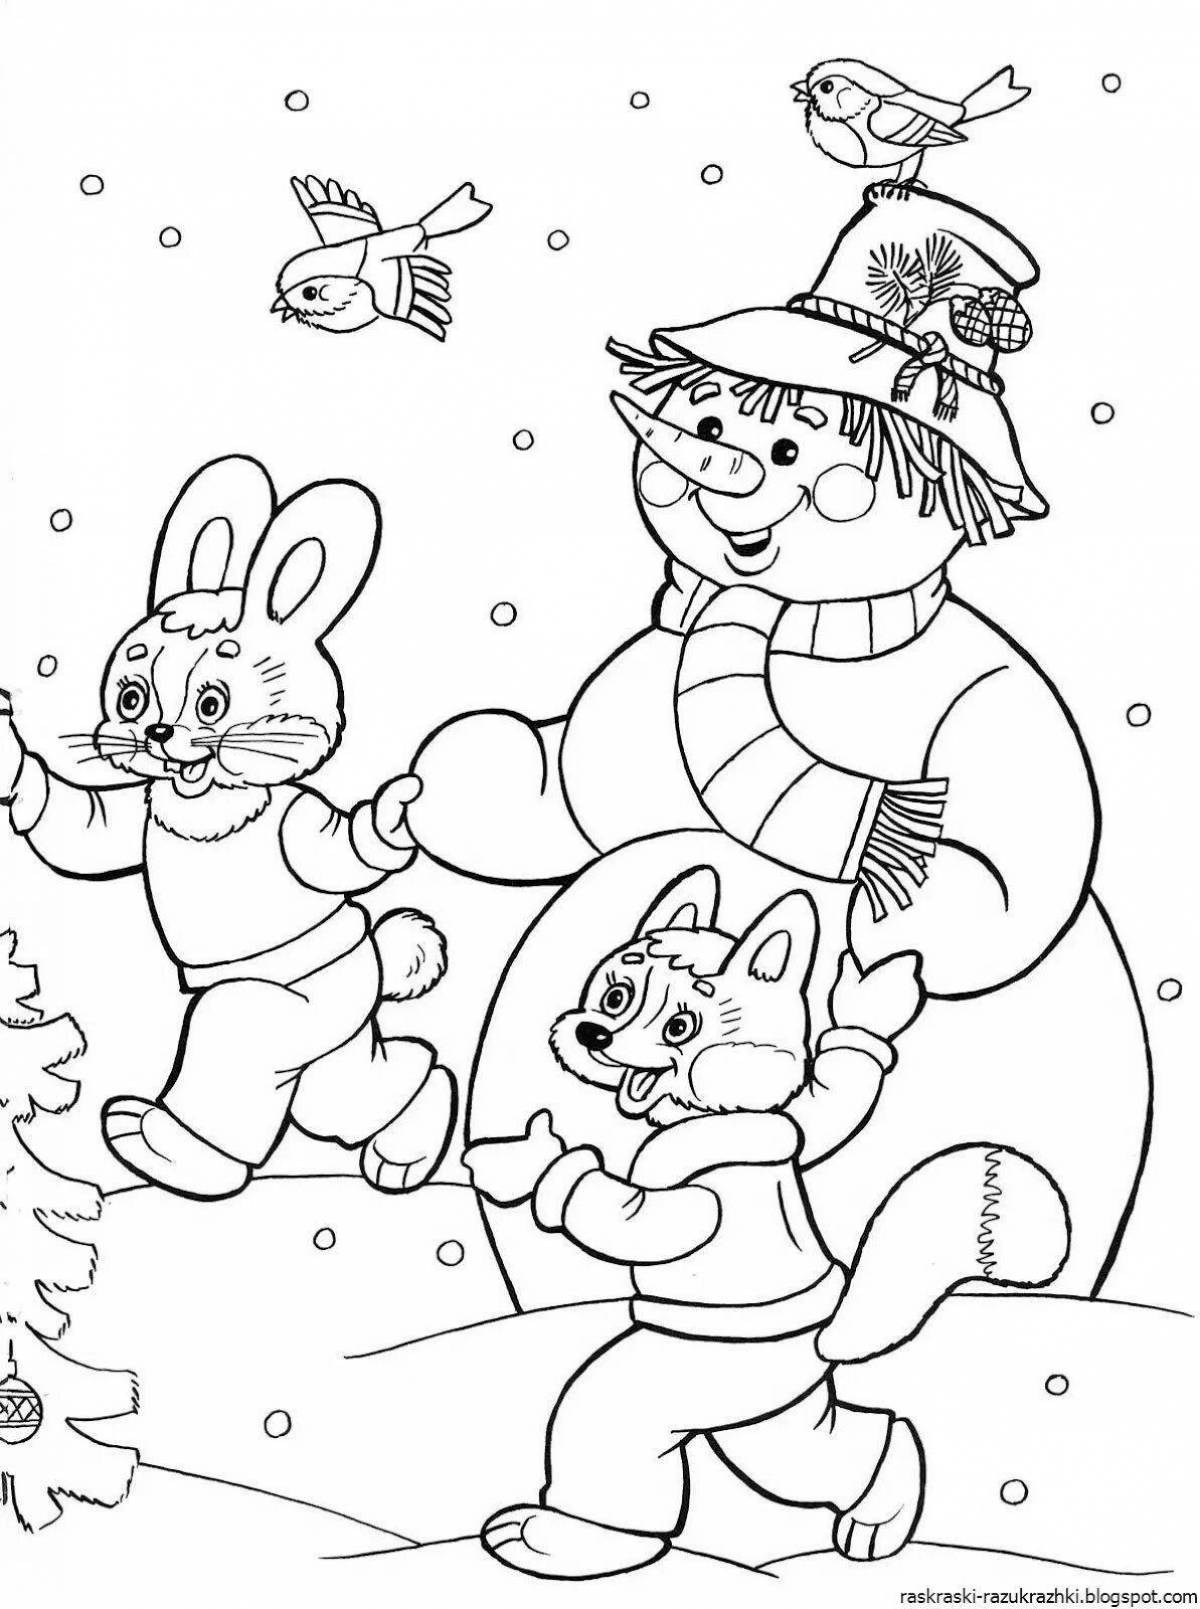 Dazzling winter coloring book for kids 6-7 years old